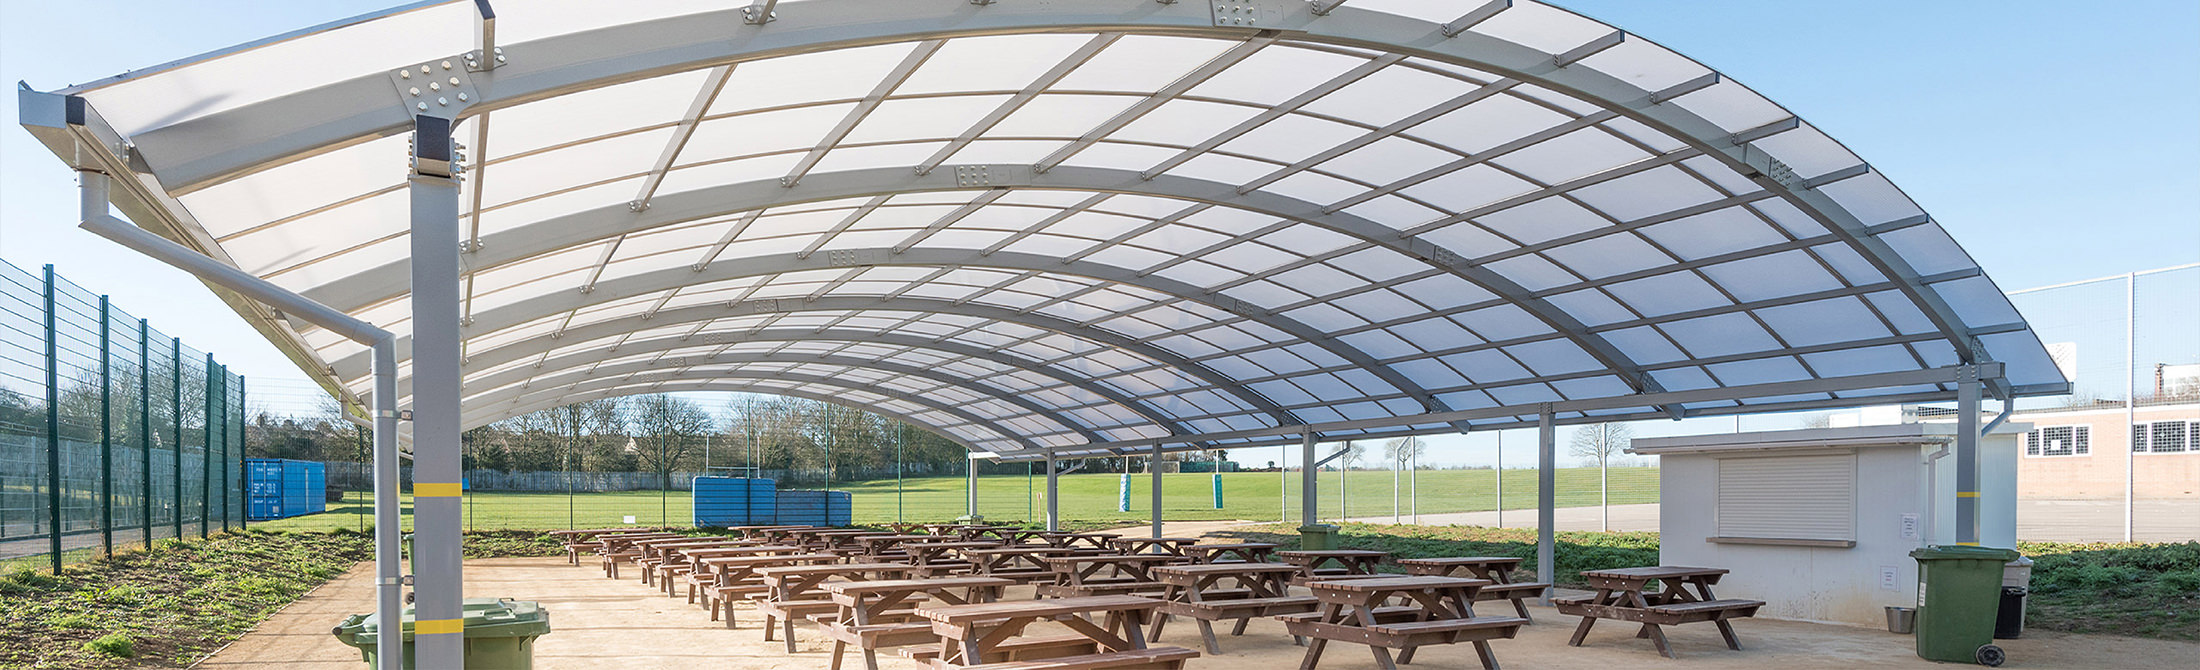 Polycarbonate covered outdoor seating area